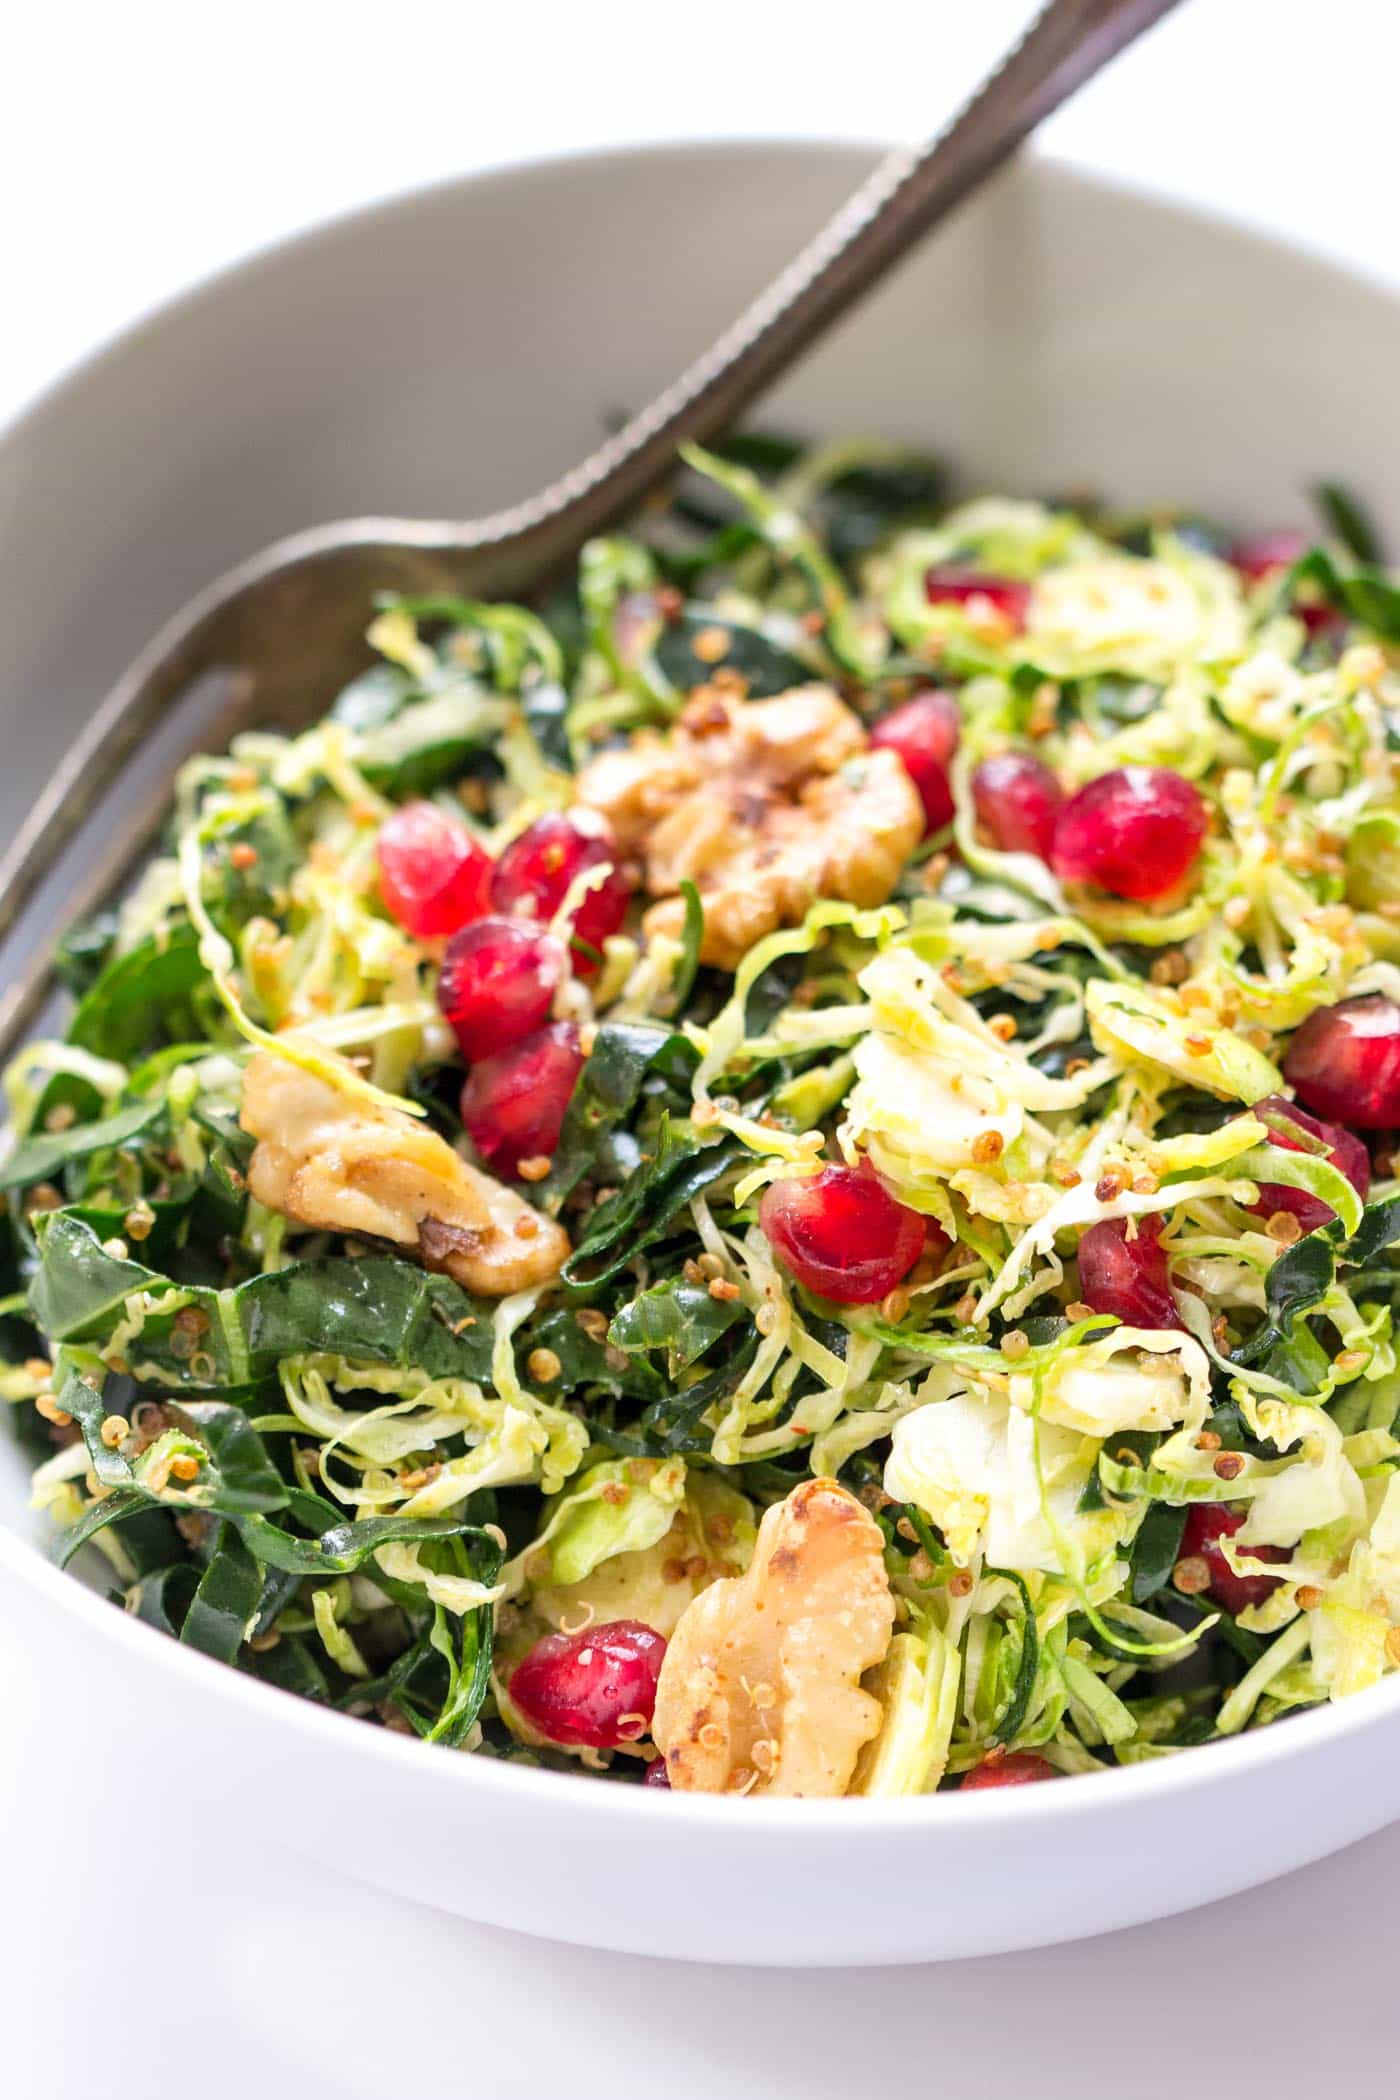 Kale + Shredded Brussels Sprout Quinoa Salad with pomegranates and toasted walnuts -- quick, easy and perfect for detoxing during the holidays!